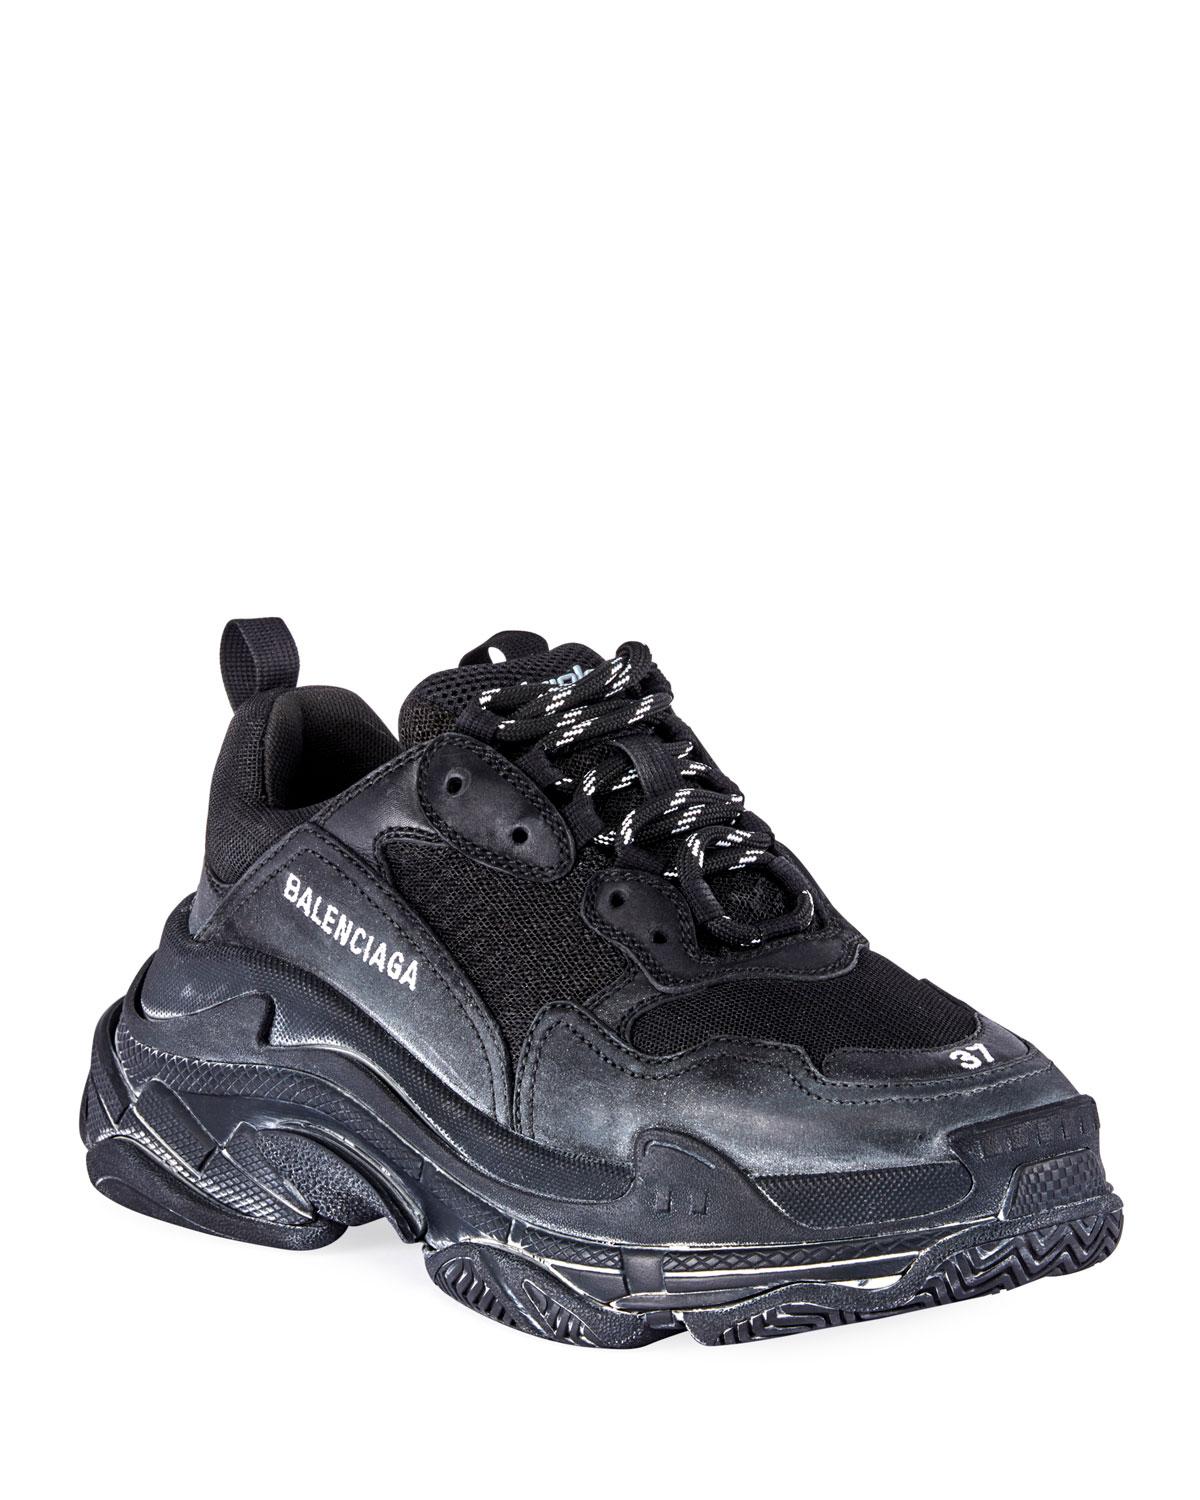 Balenciaga Synthetic Triple S Clear Sole Sneakers in Black